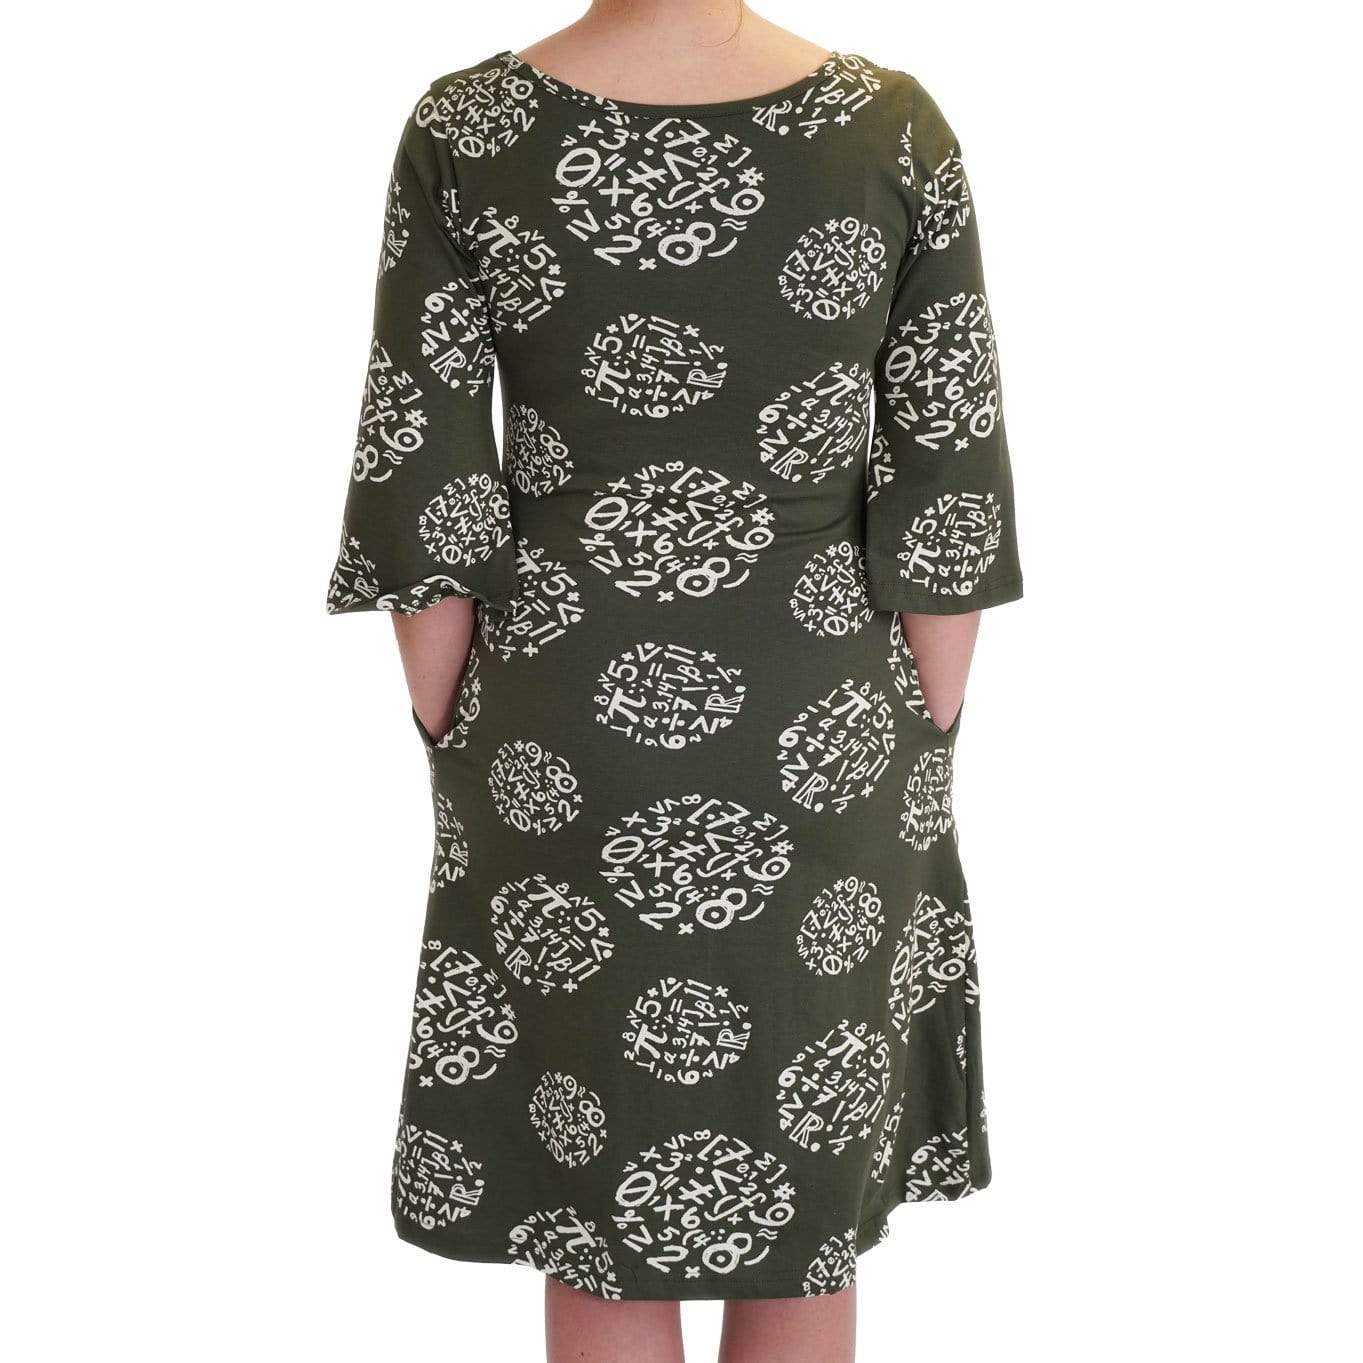 Circles of Calculation Curie Dress